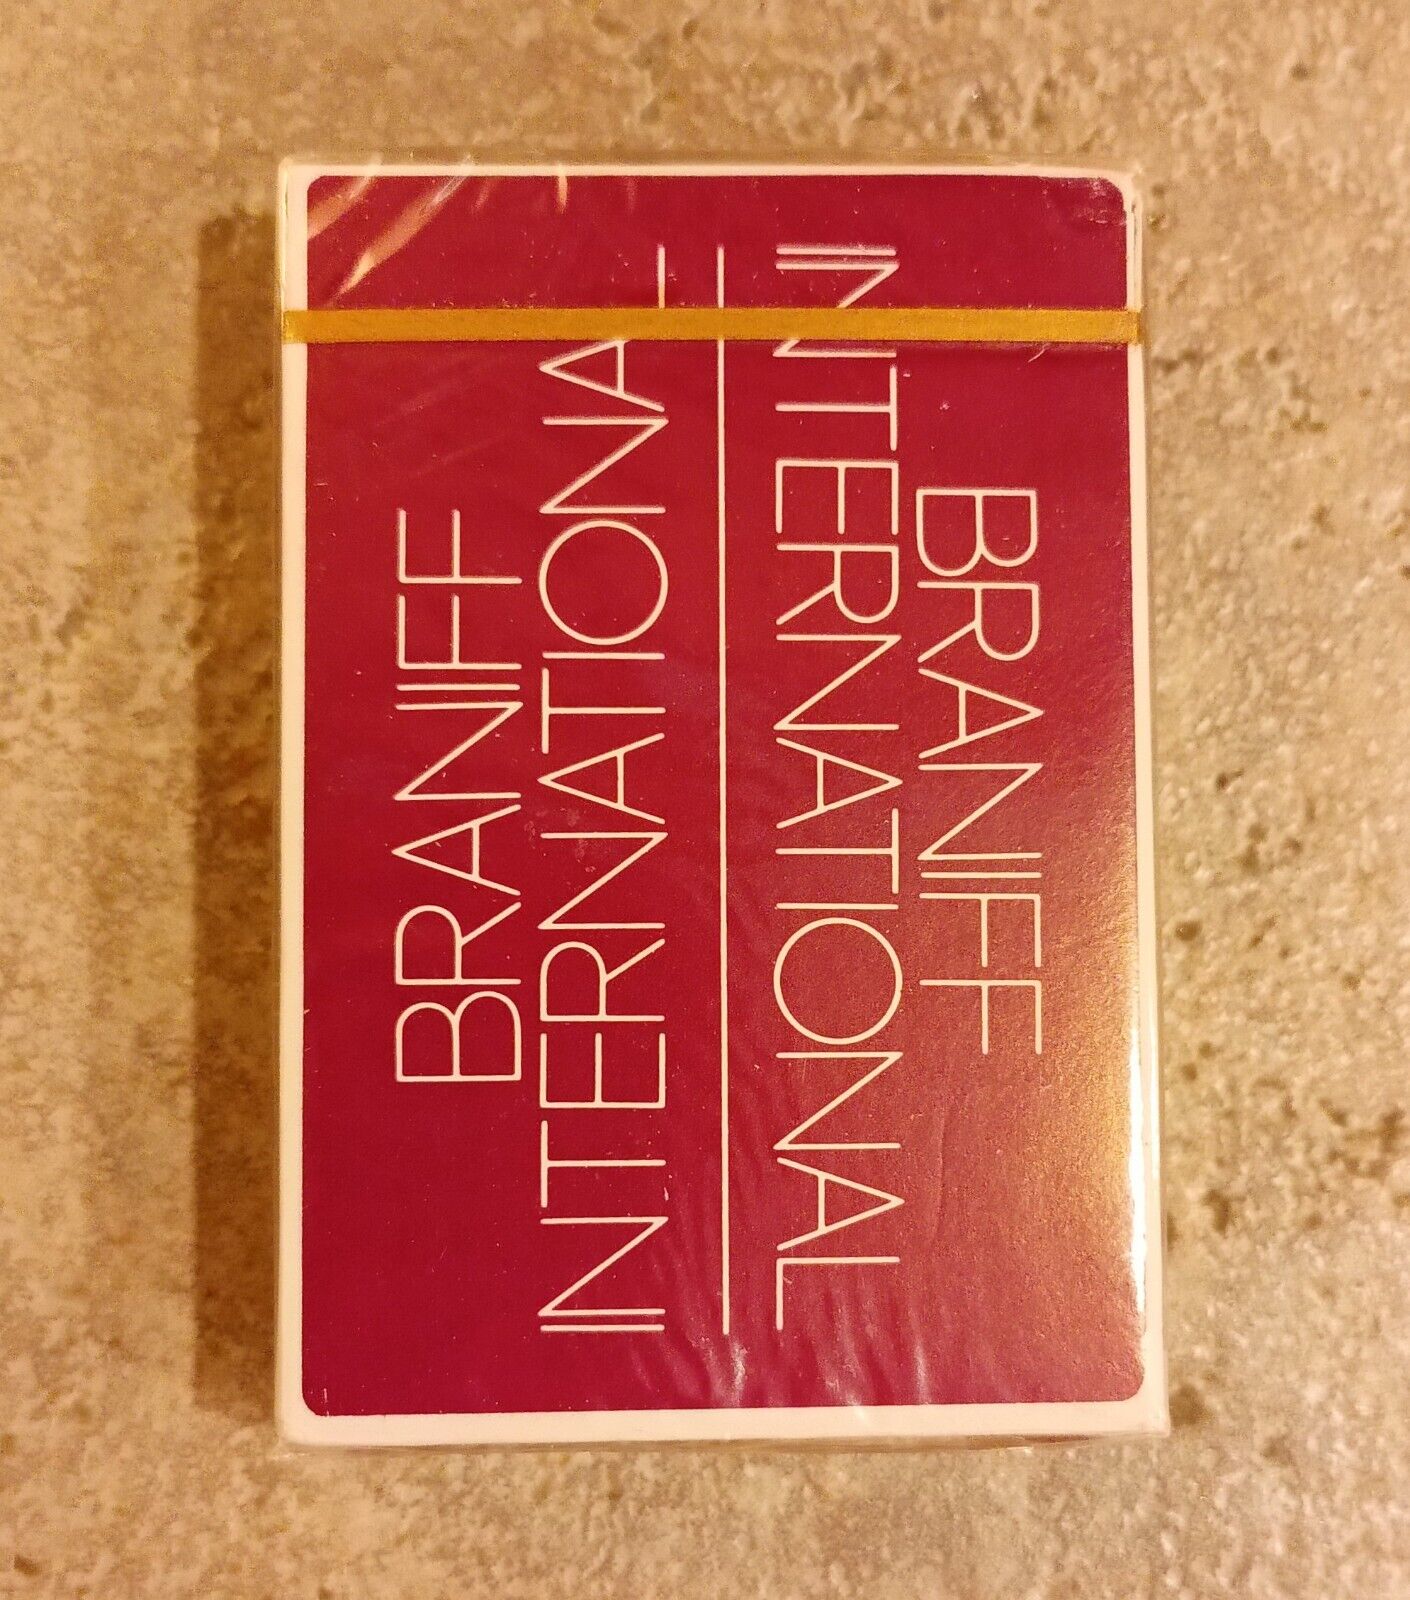 Rare Vintage BRANIFF AIRLINES Souvenir Playing Cards.  New, still sealed.